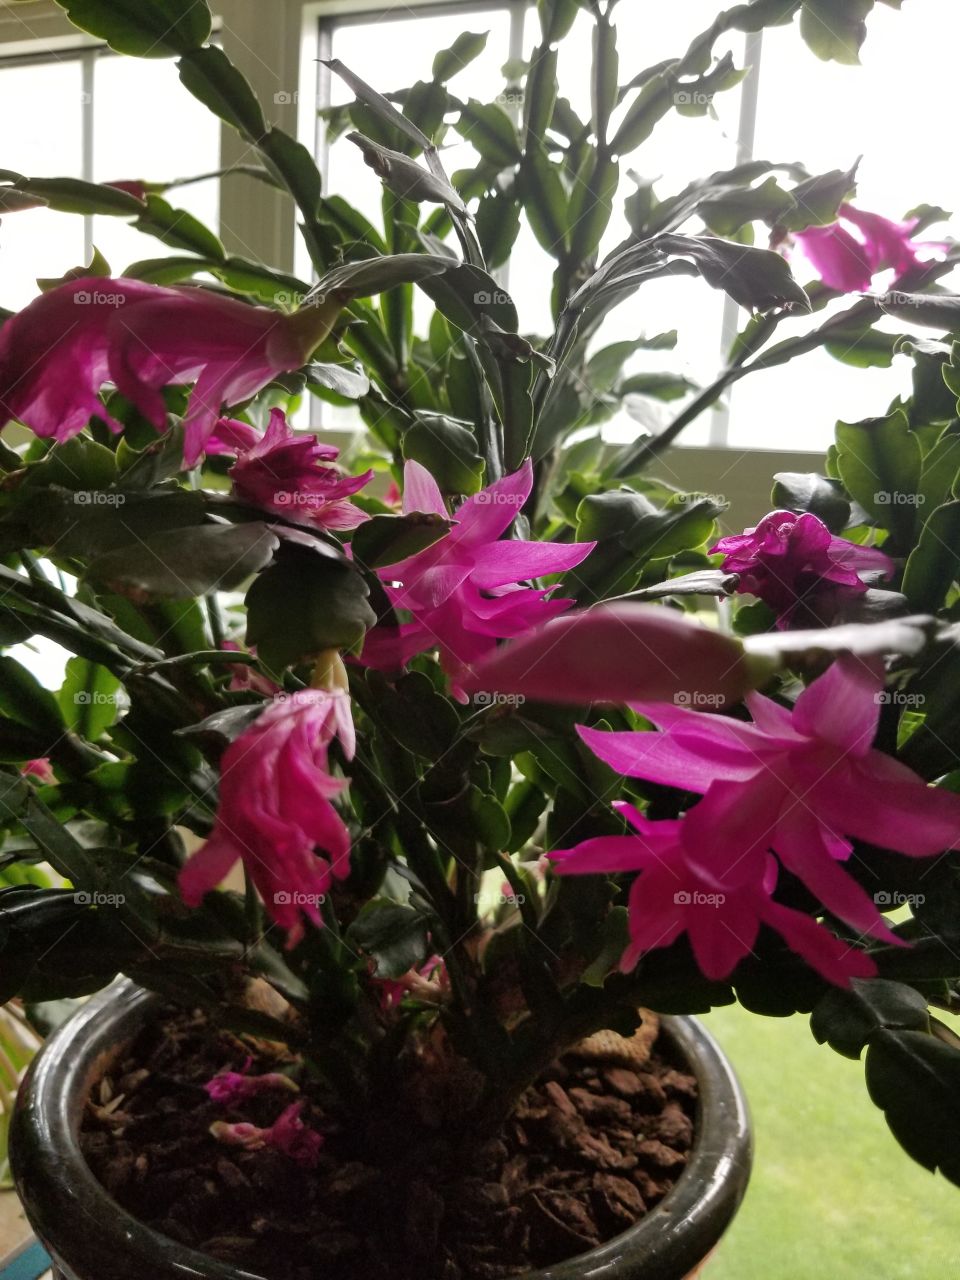 Christmas cactus blooming for Easter,  bright pink